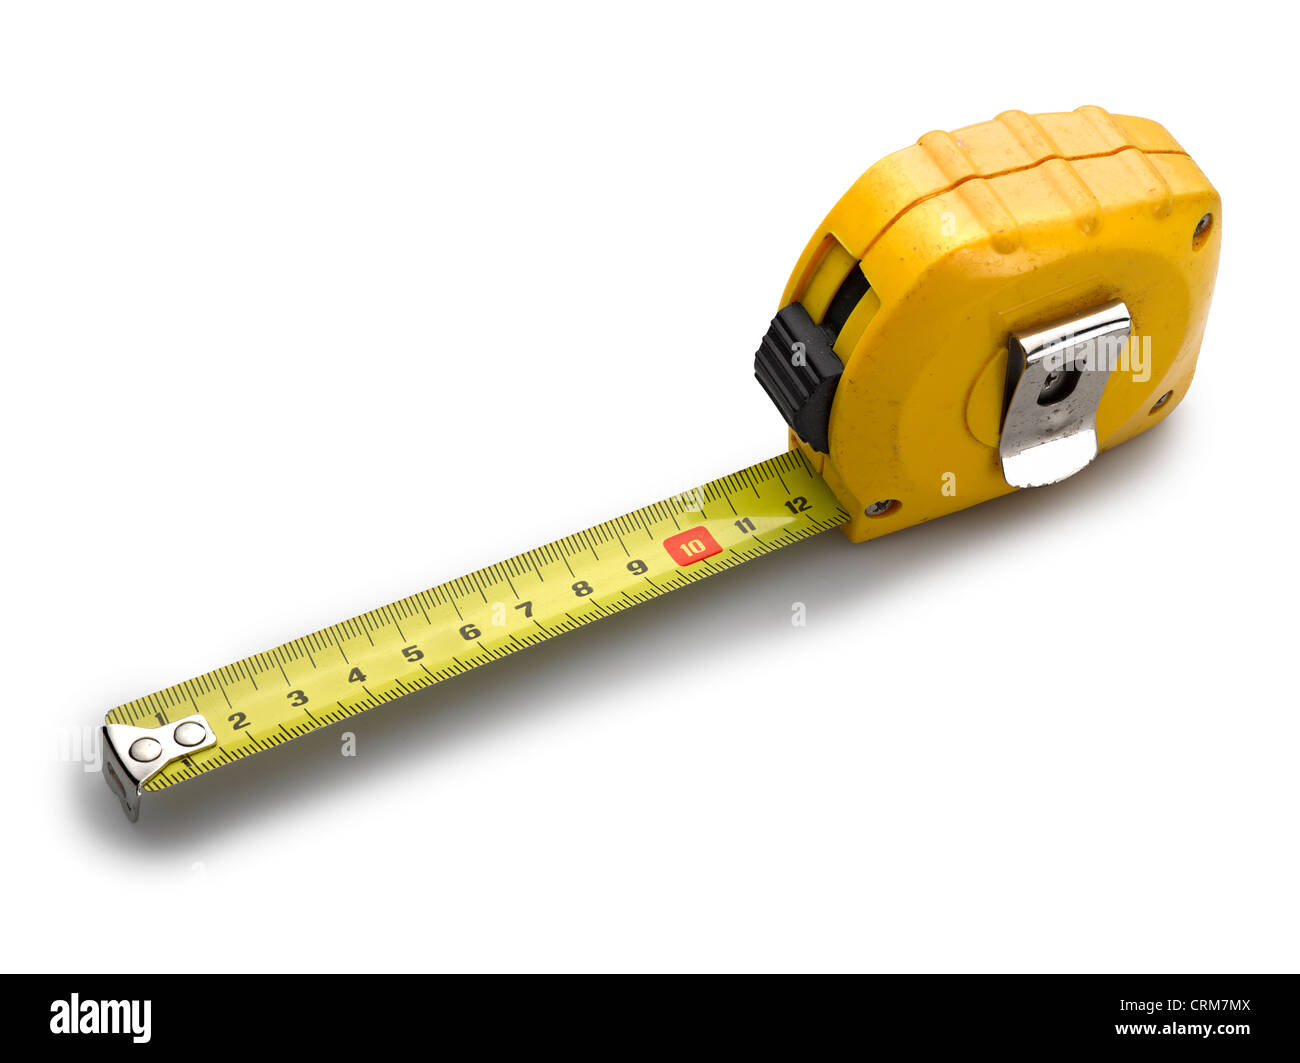 https://c8.alamy.com/comp/CRM7MX/used-tape-measure-isolated-on-white-background-CRM7MX.jpg